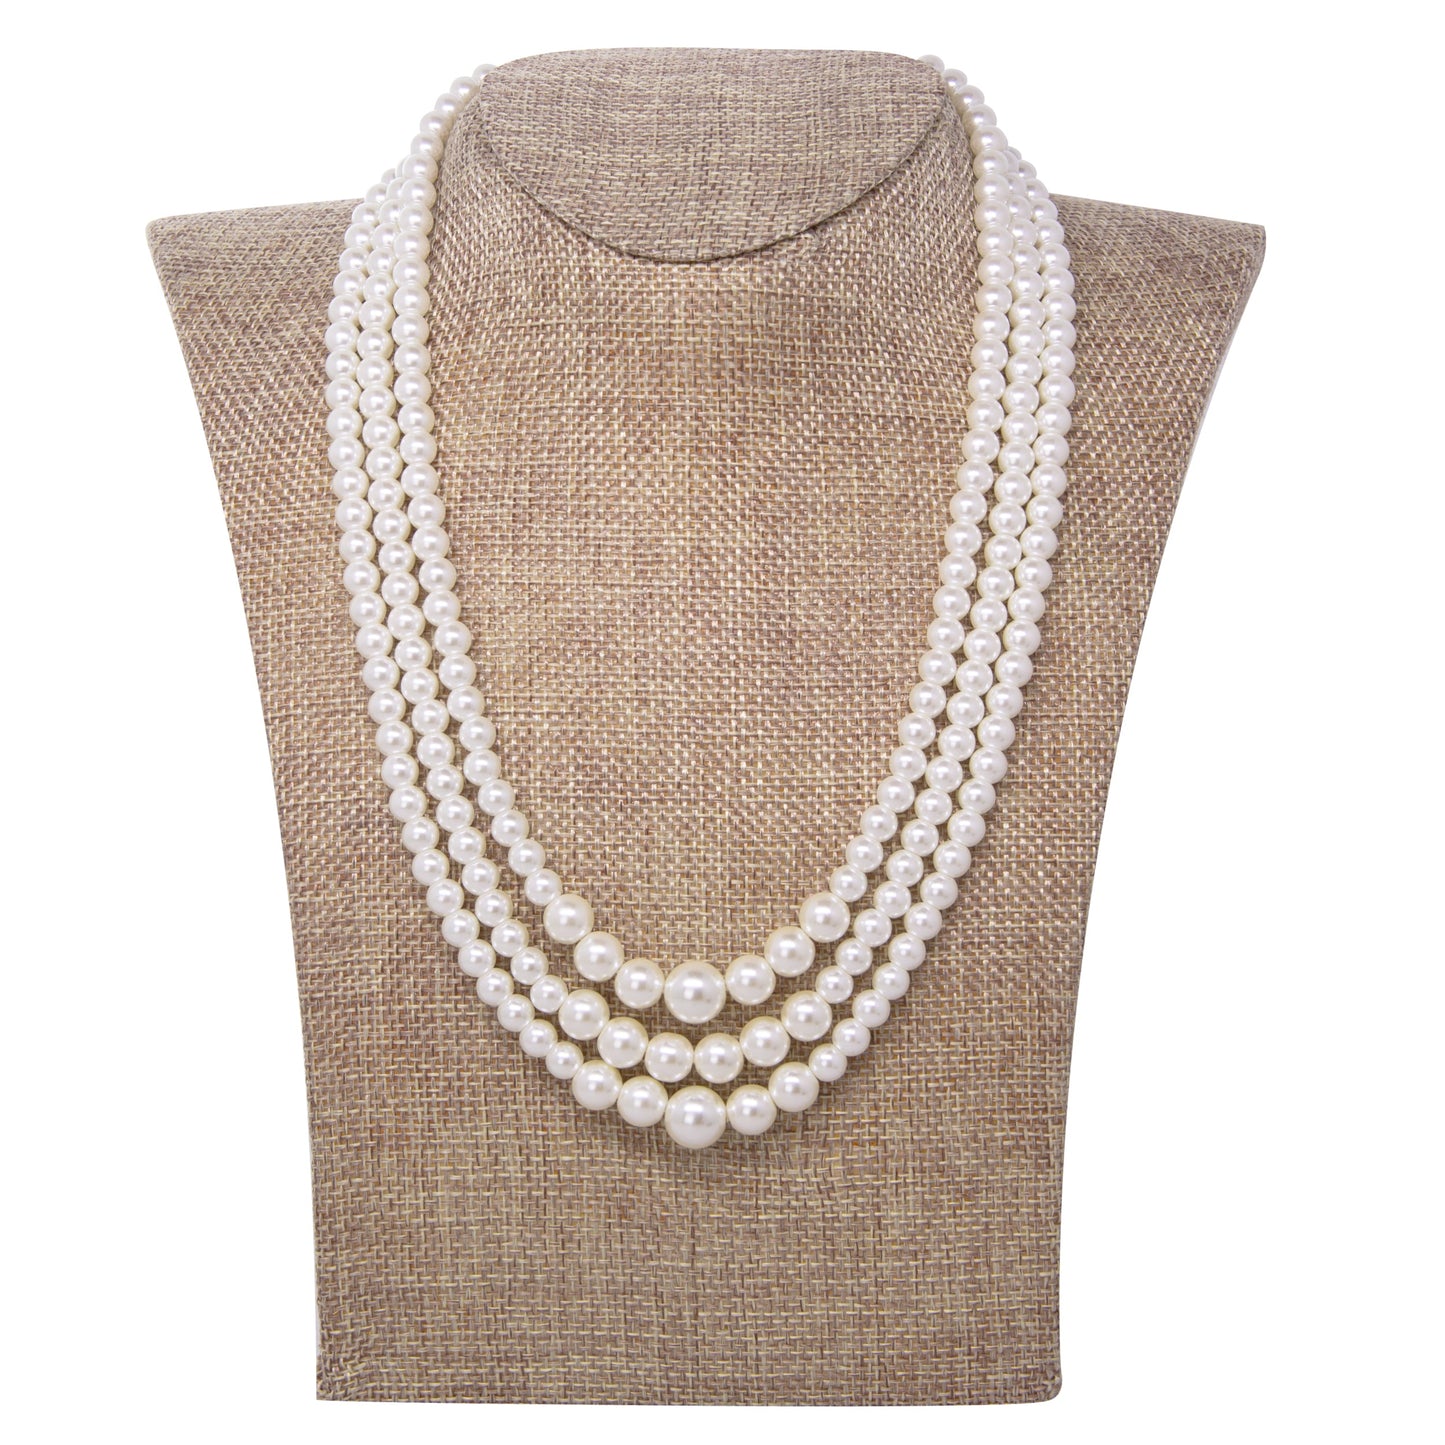 1928 Jewelry Classic 3 Strand Faux Pearl Necklace 16" + 3" Extender